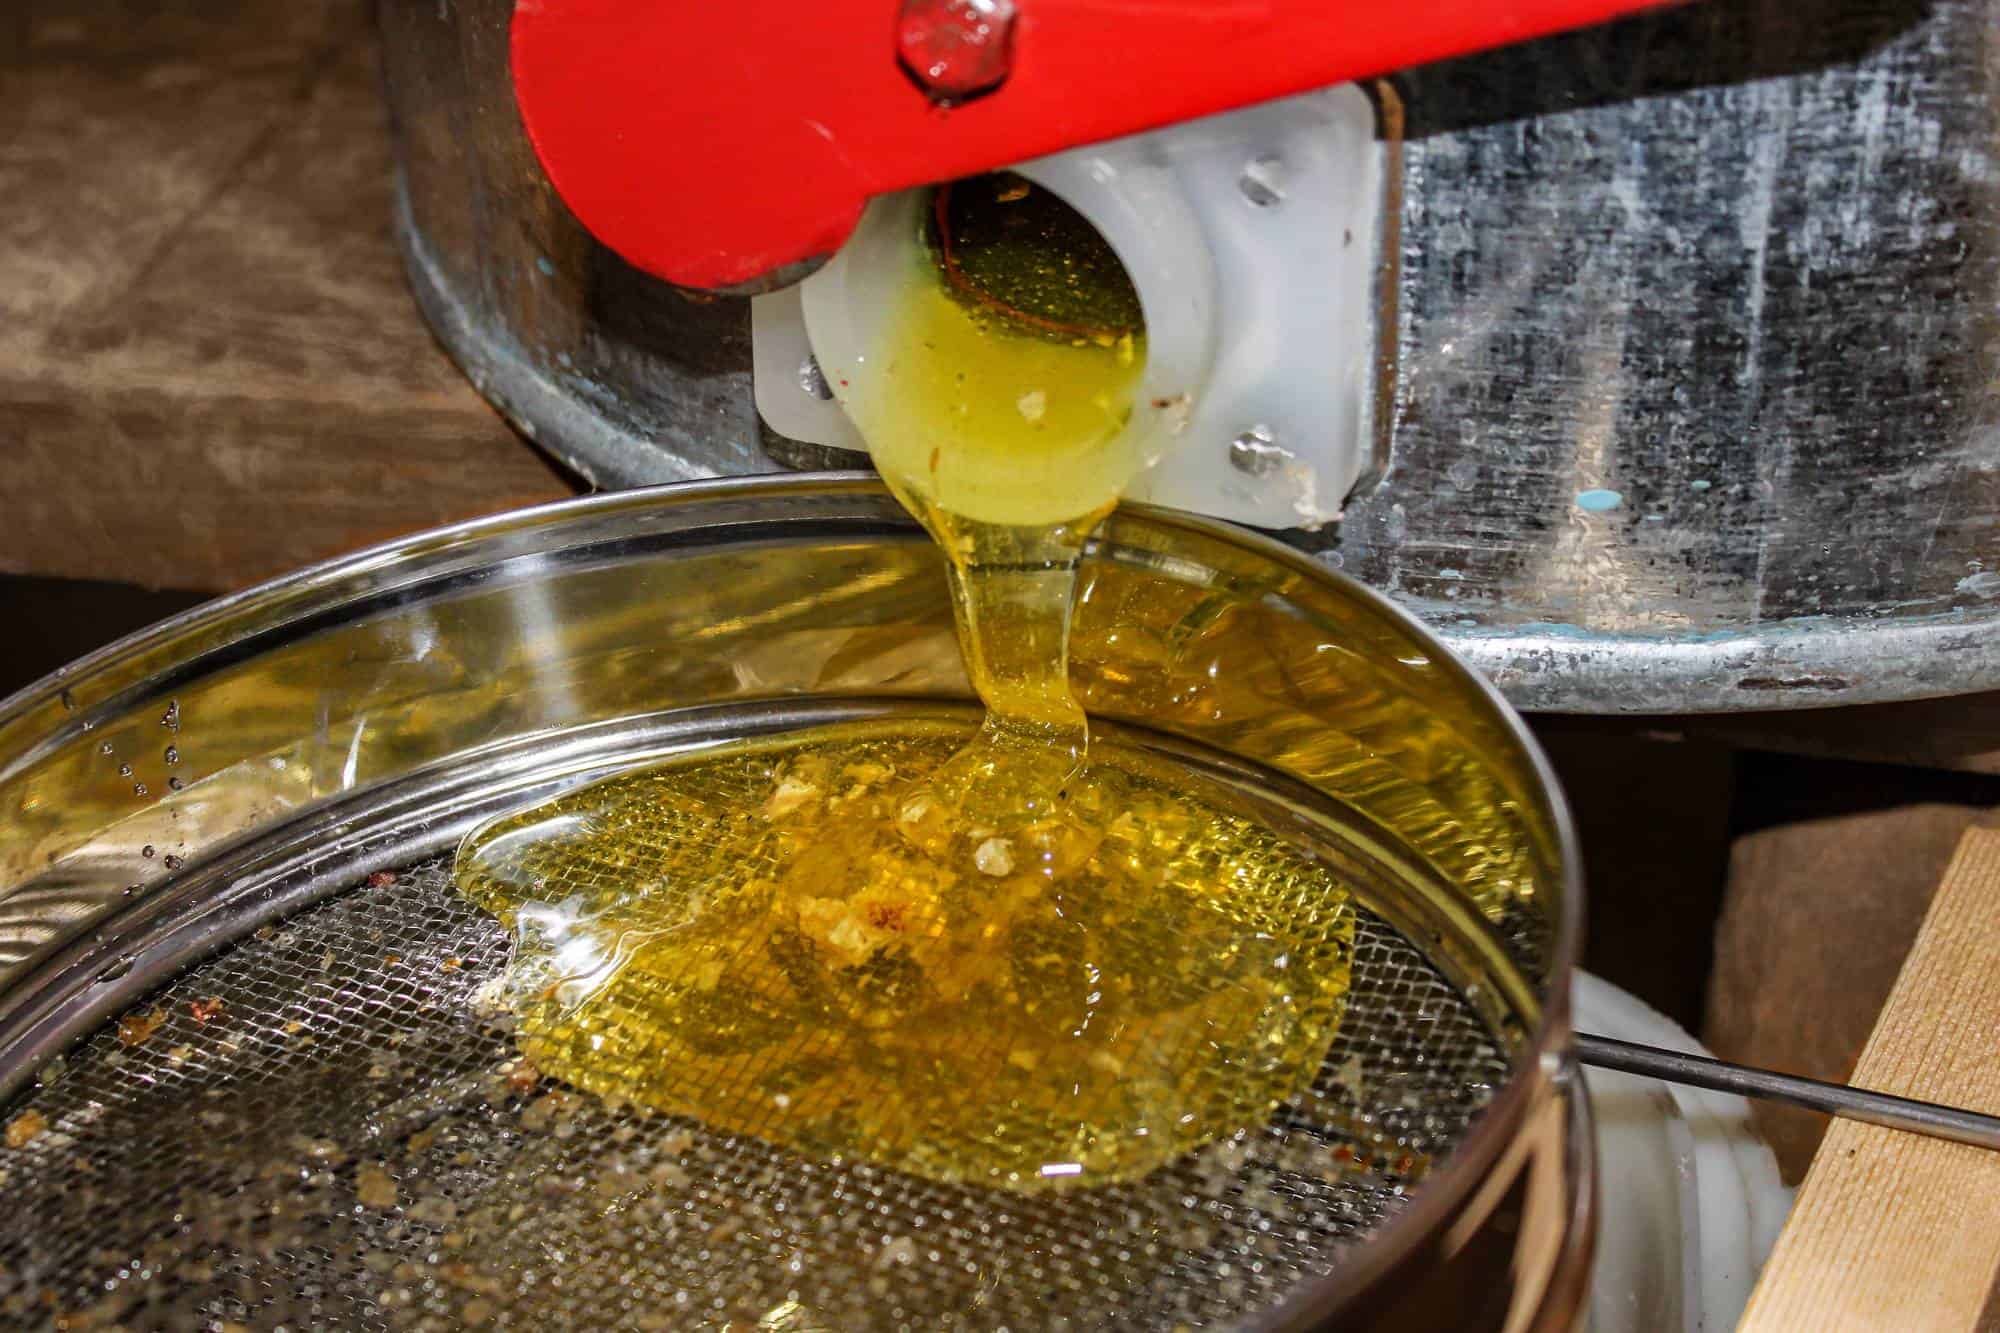 How to clean beeswax from a strainer.